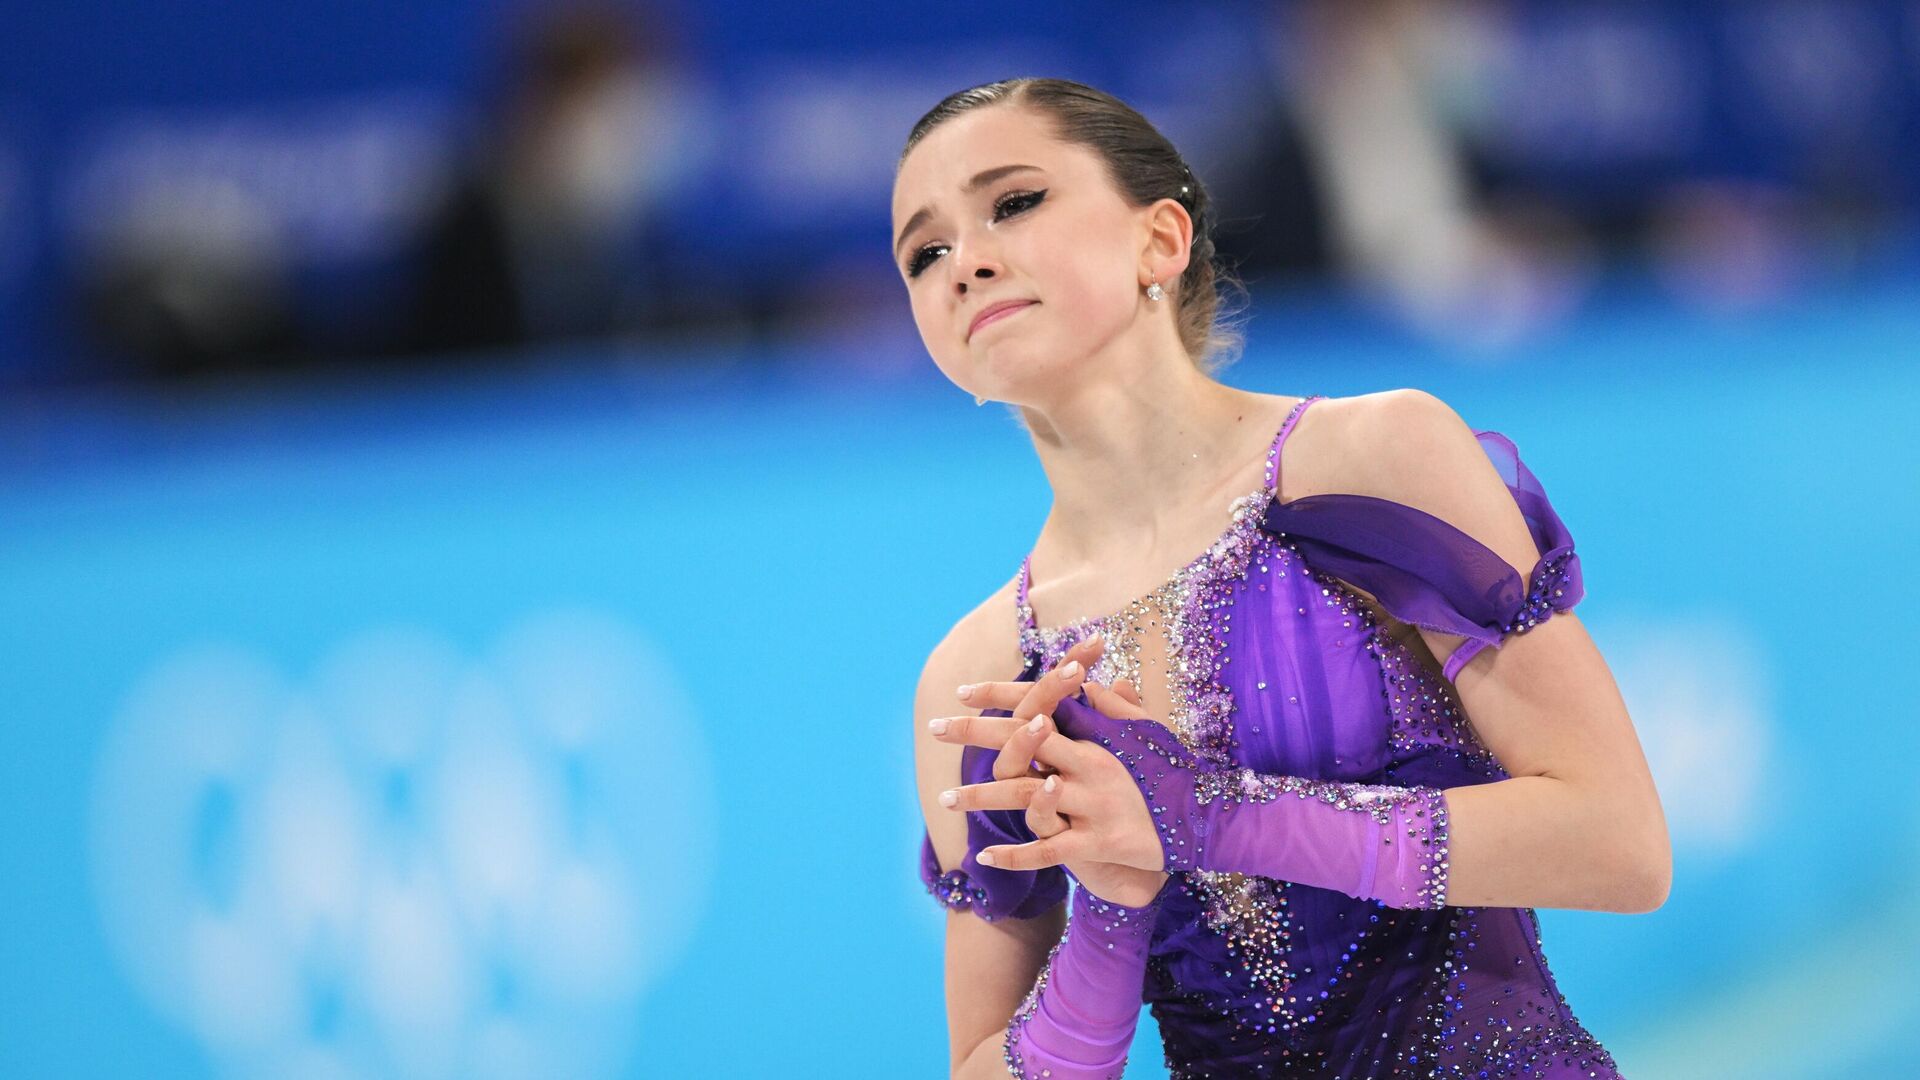 The Russian Olympic Committee's Kamila Valieva competes in the women's singles skating short programme during the Beijing 2022 Winter Olympic Games. - Sputnik International, 1920, 15.02.2022